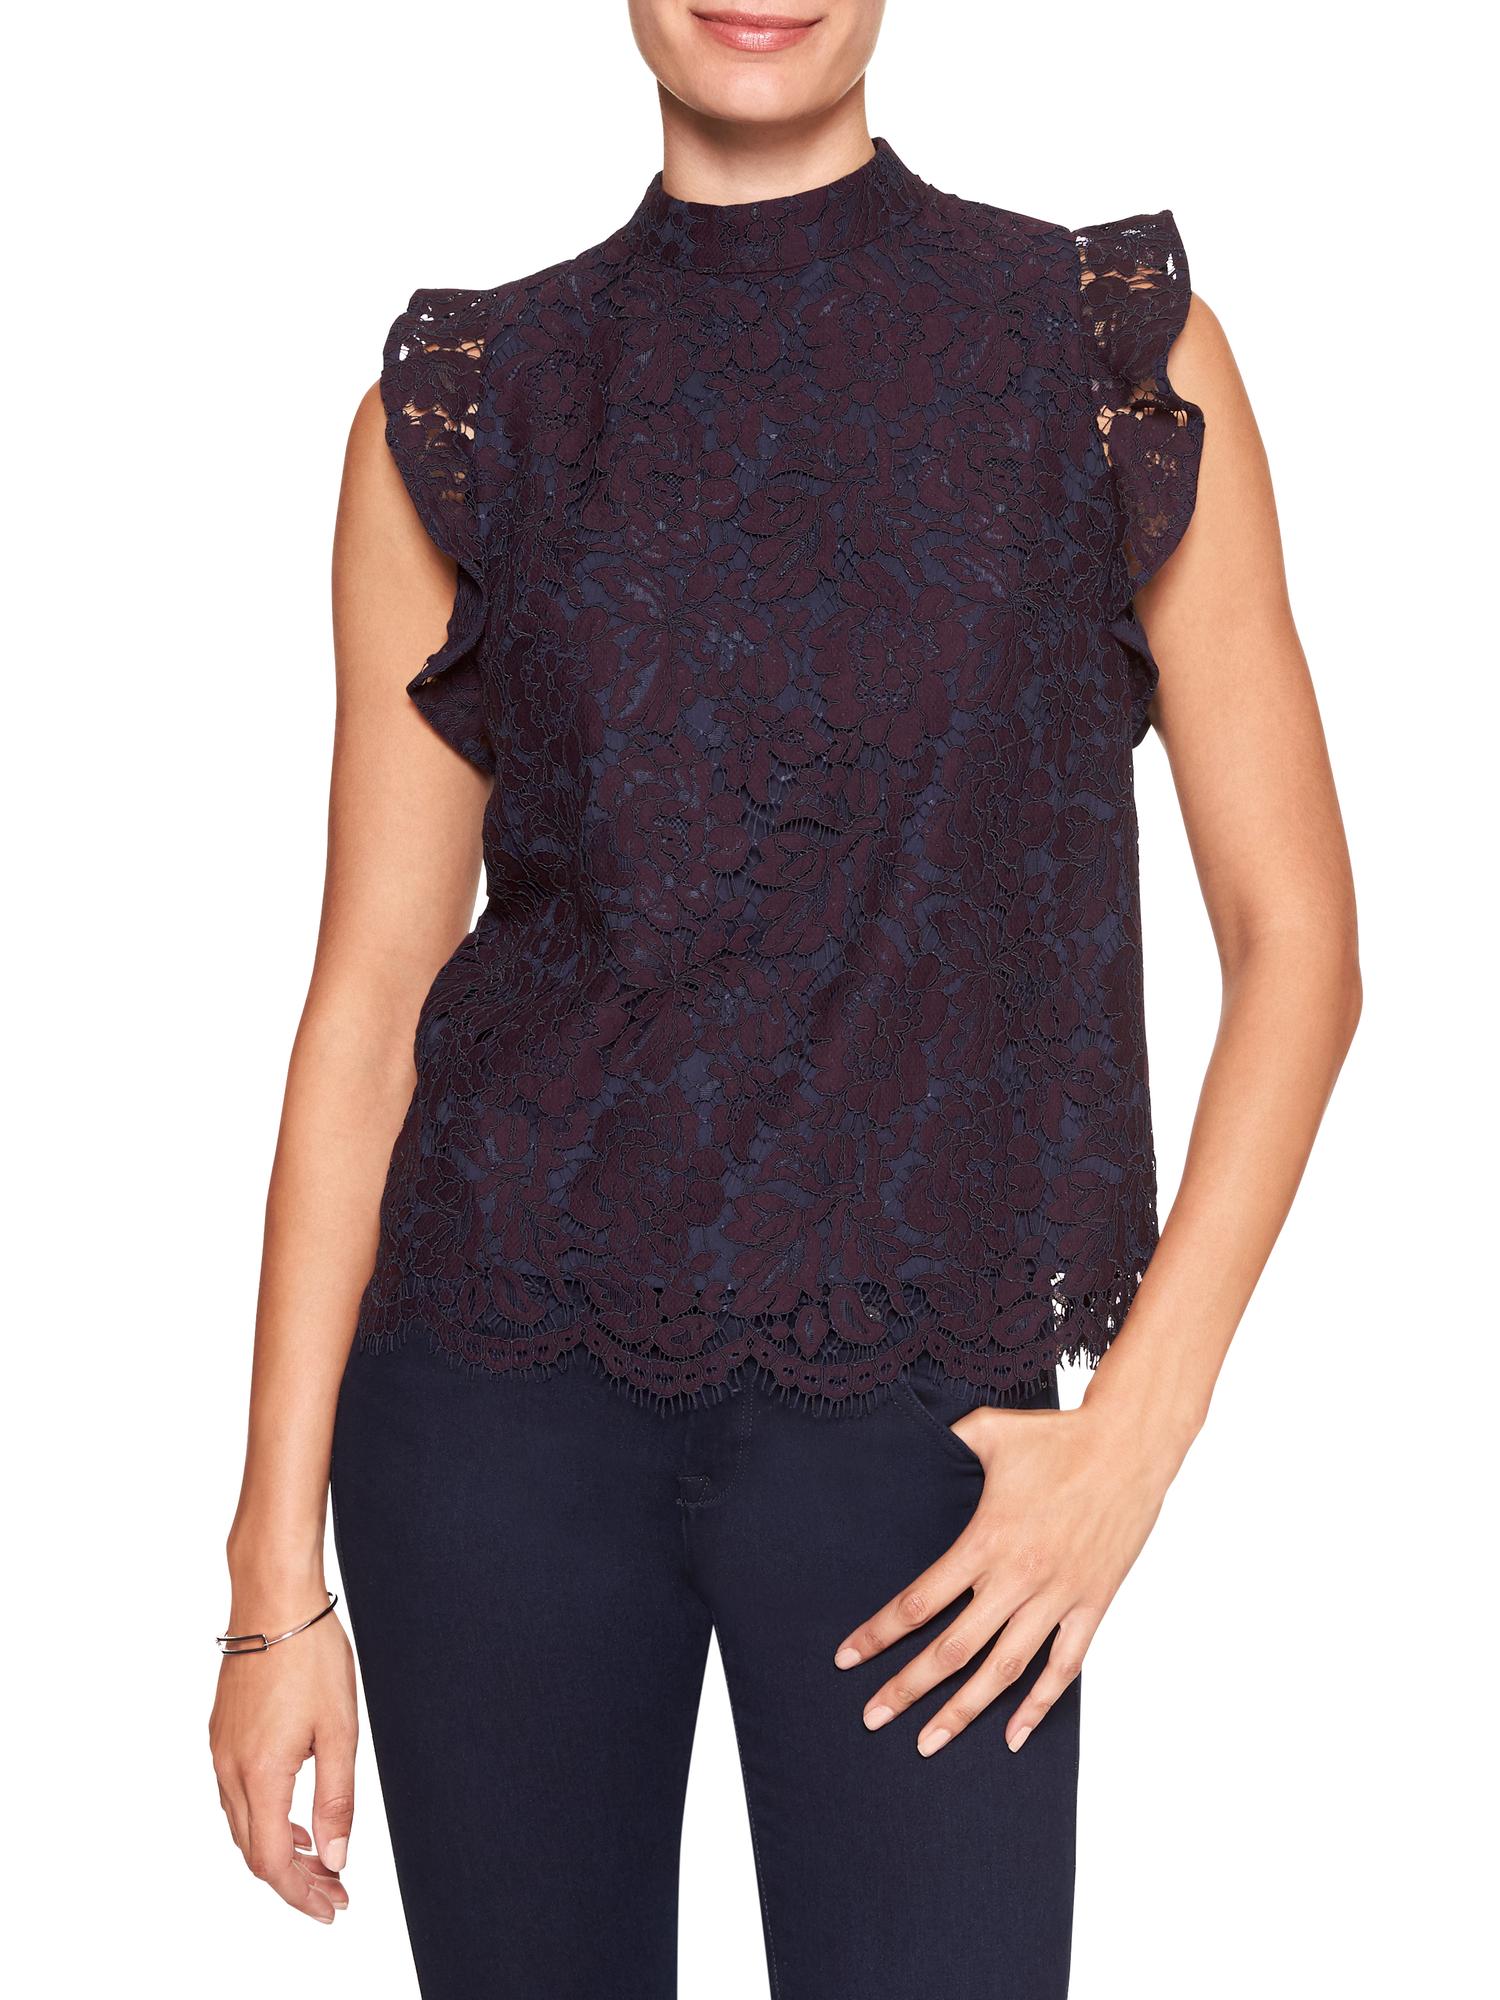 Two-Tone Lace Top